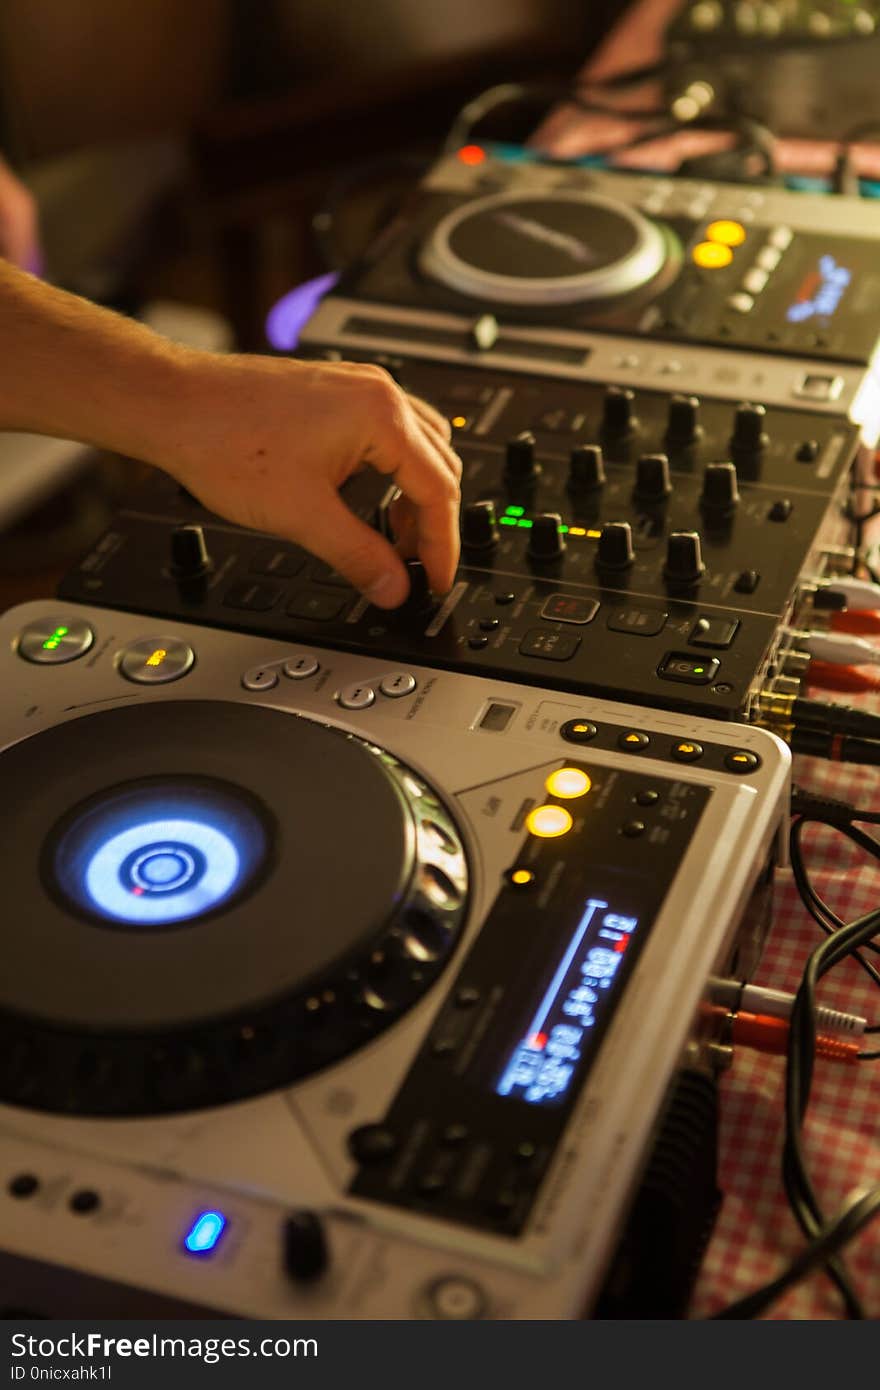 Dj mixing music on professional mixer in club. Dj mixing music on professional mixer in club